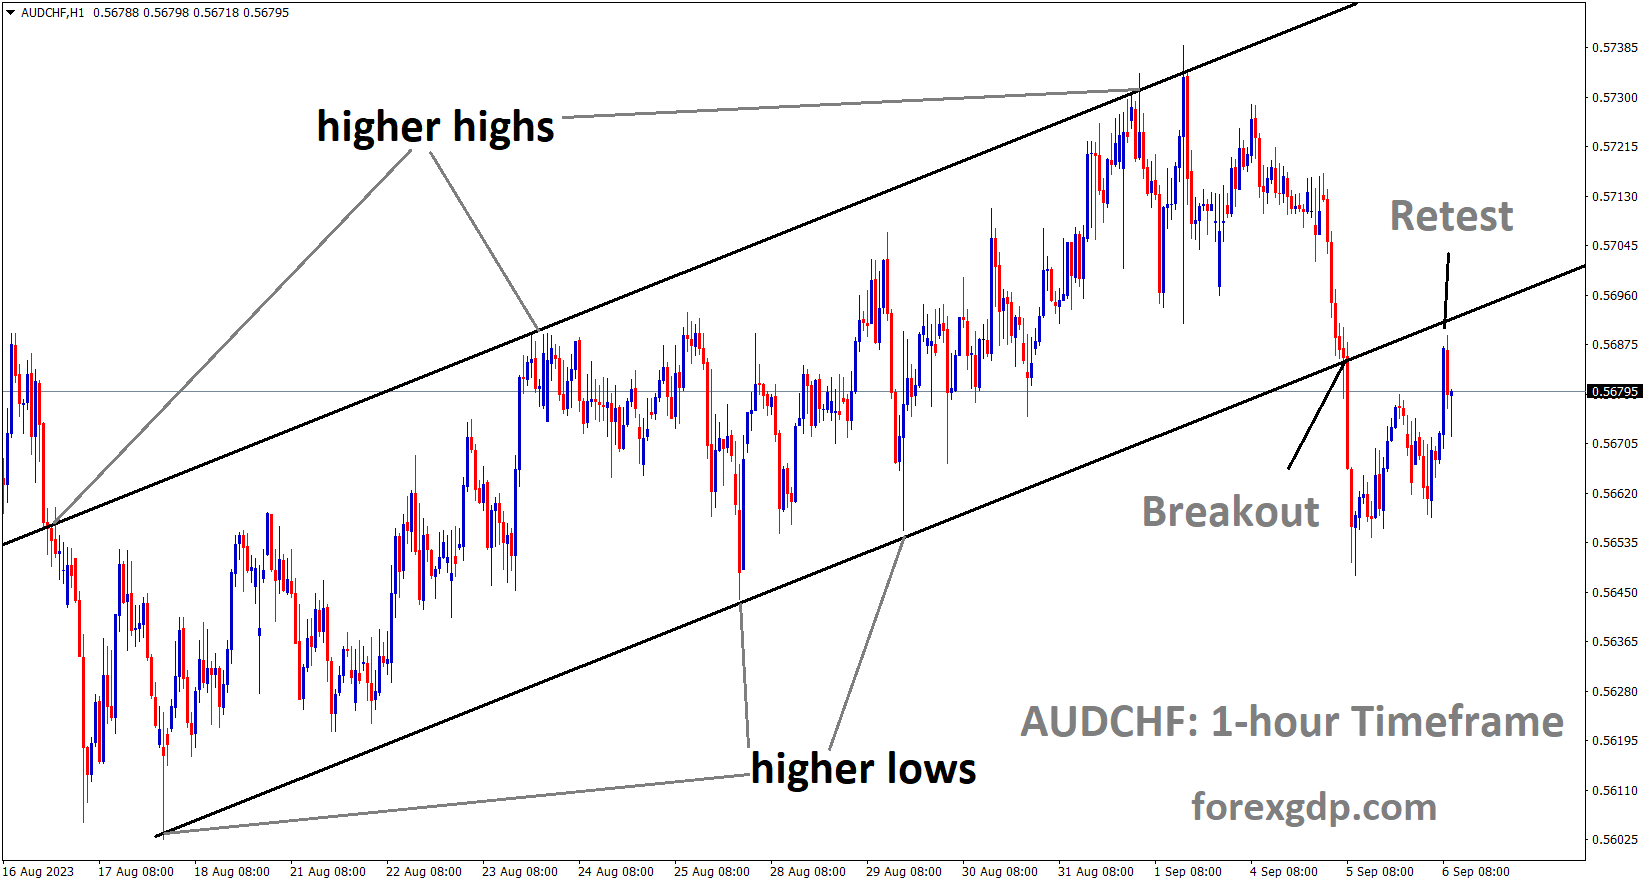 AUDCHF has broken the Ascending channel and retest the broken area of the channel